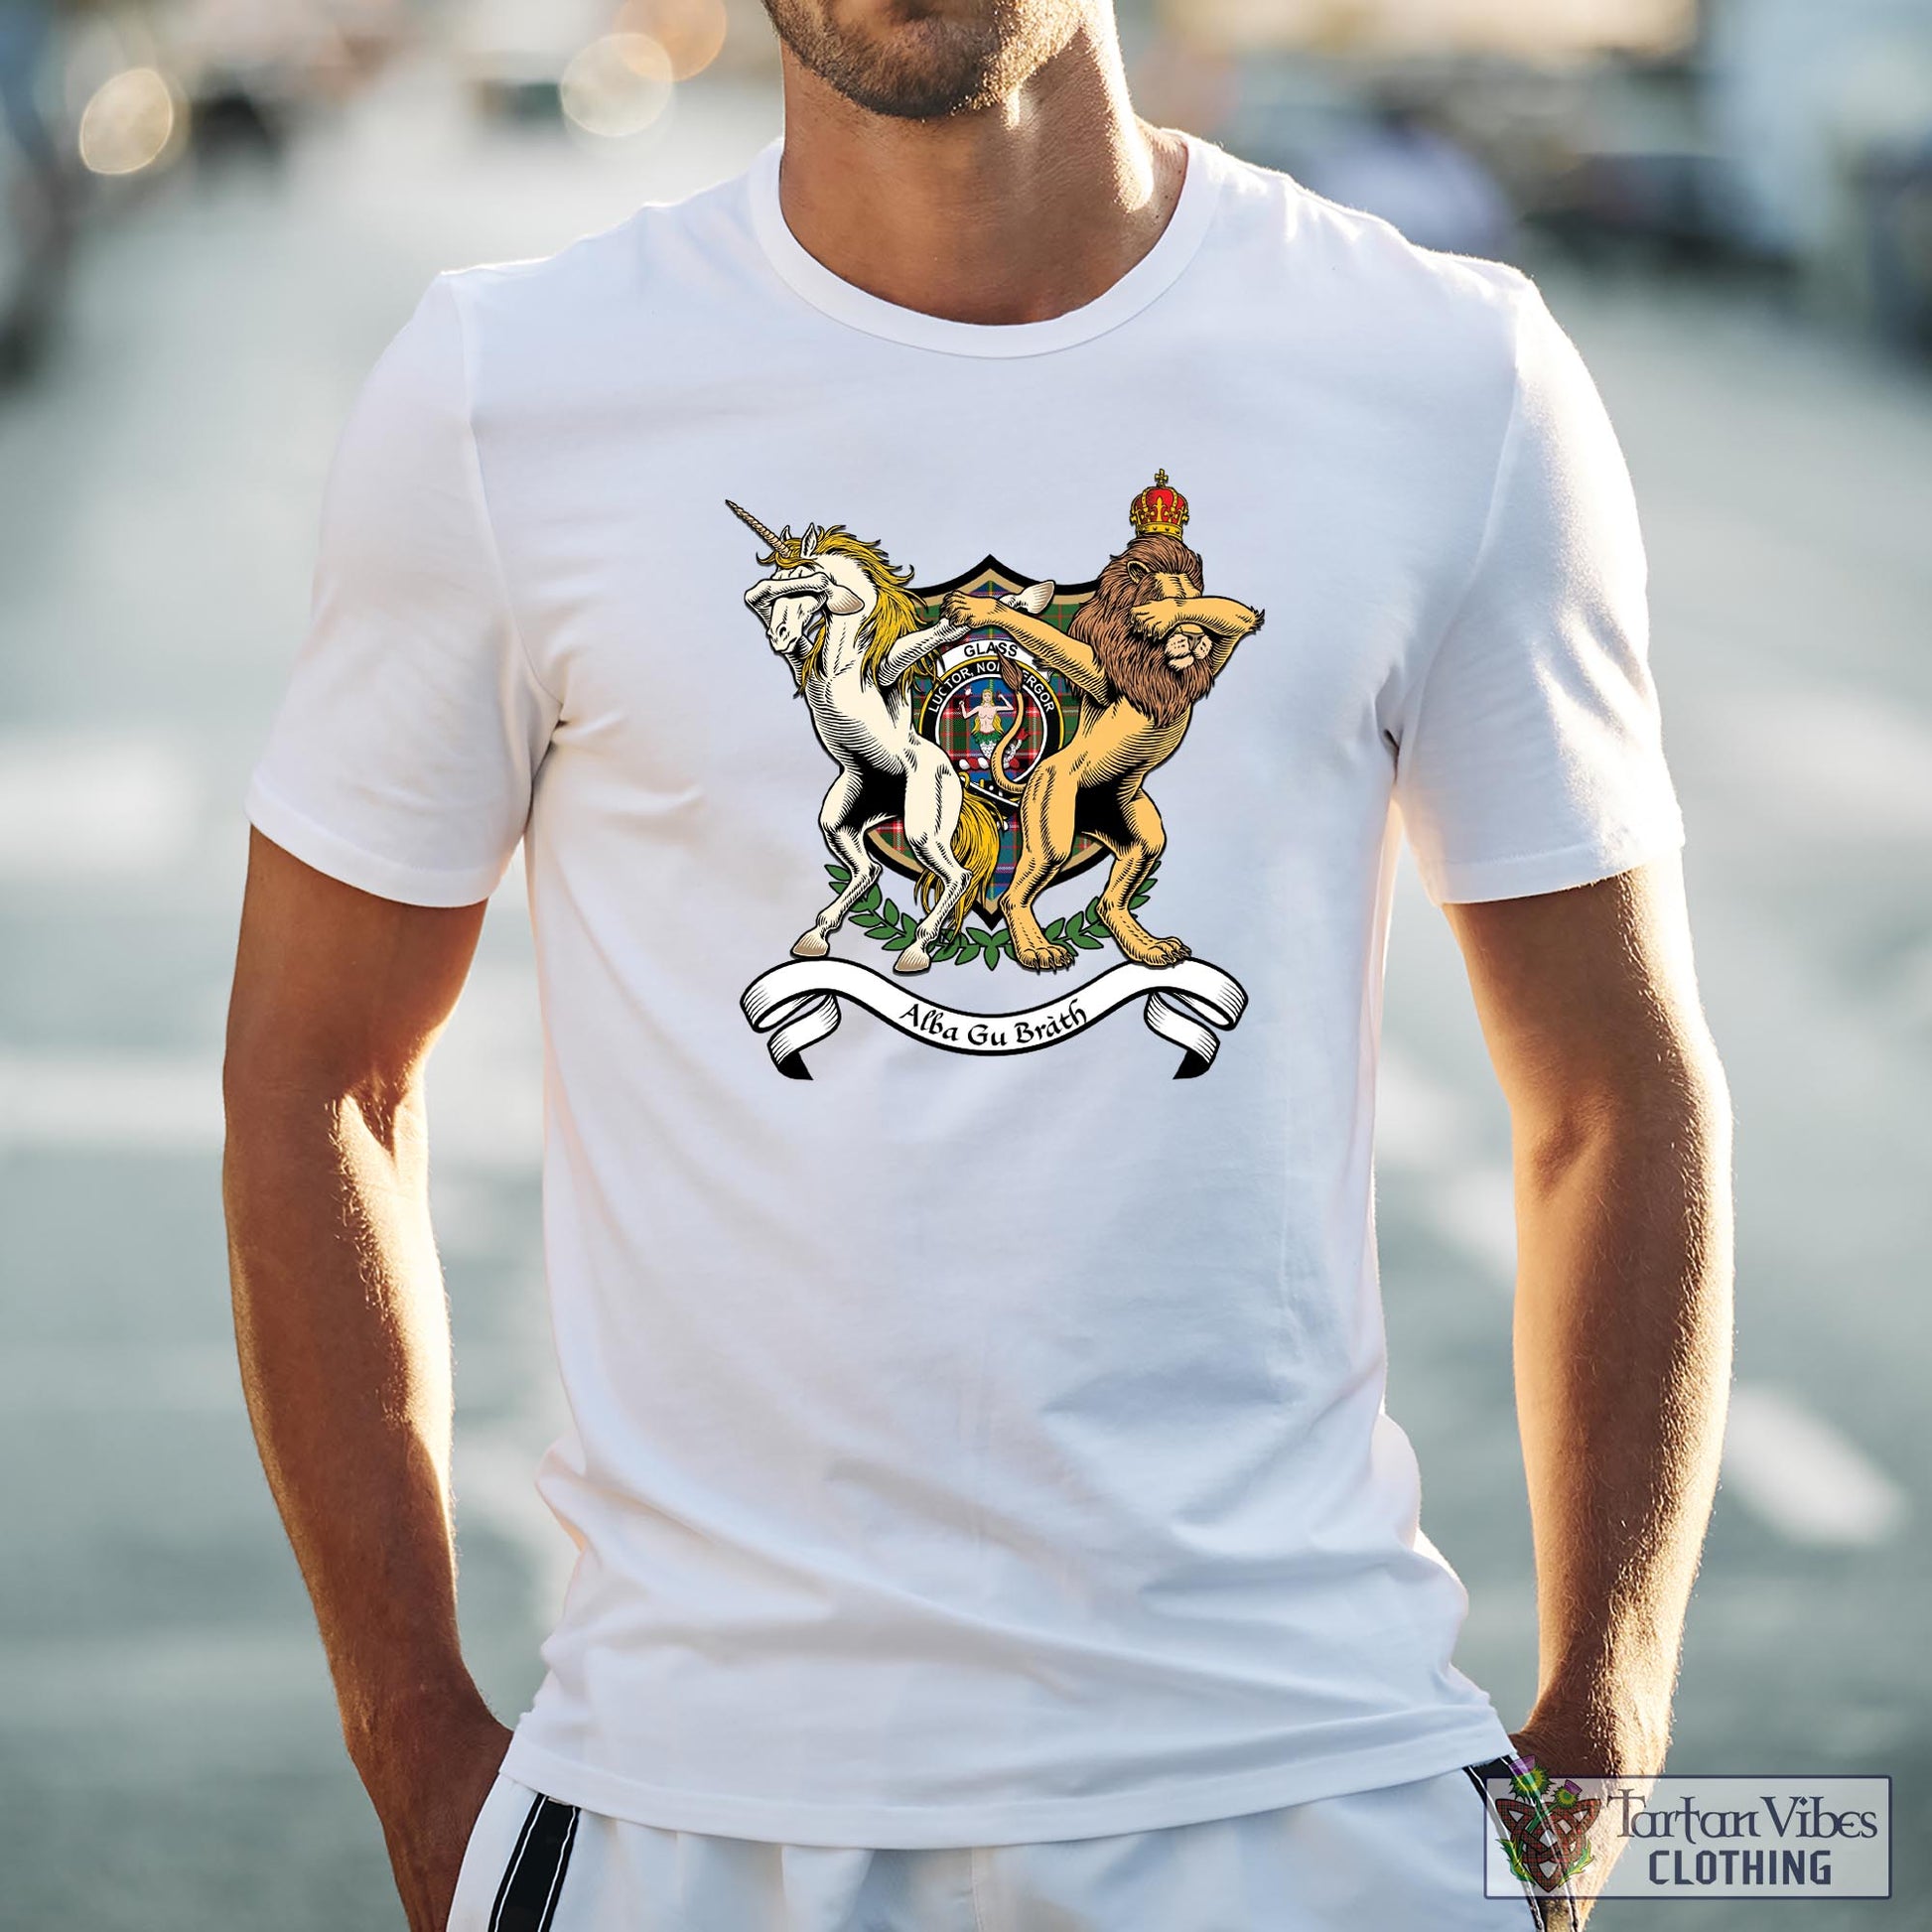 Tartan Vibes Clothing Glass Family Crest Cotton Men's T-Shirt with Scotland Royal Coat Of Arm Funny Style